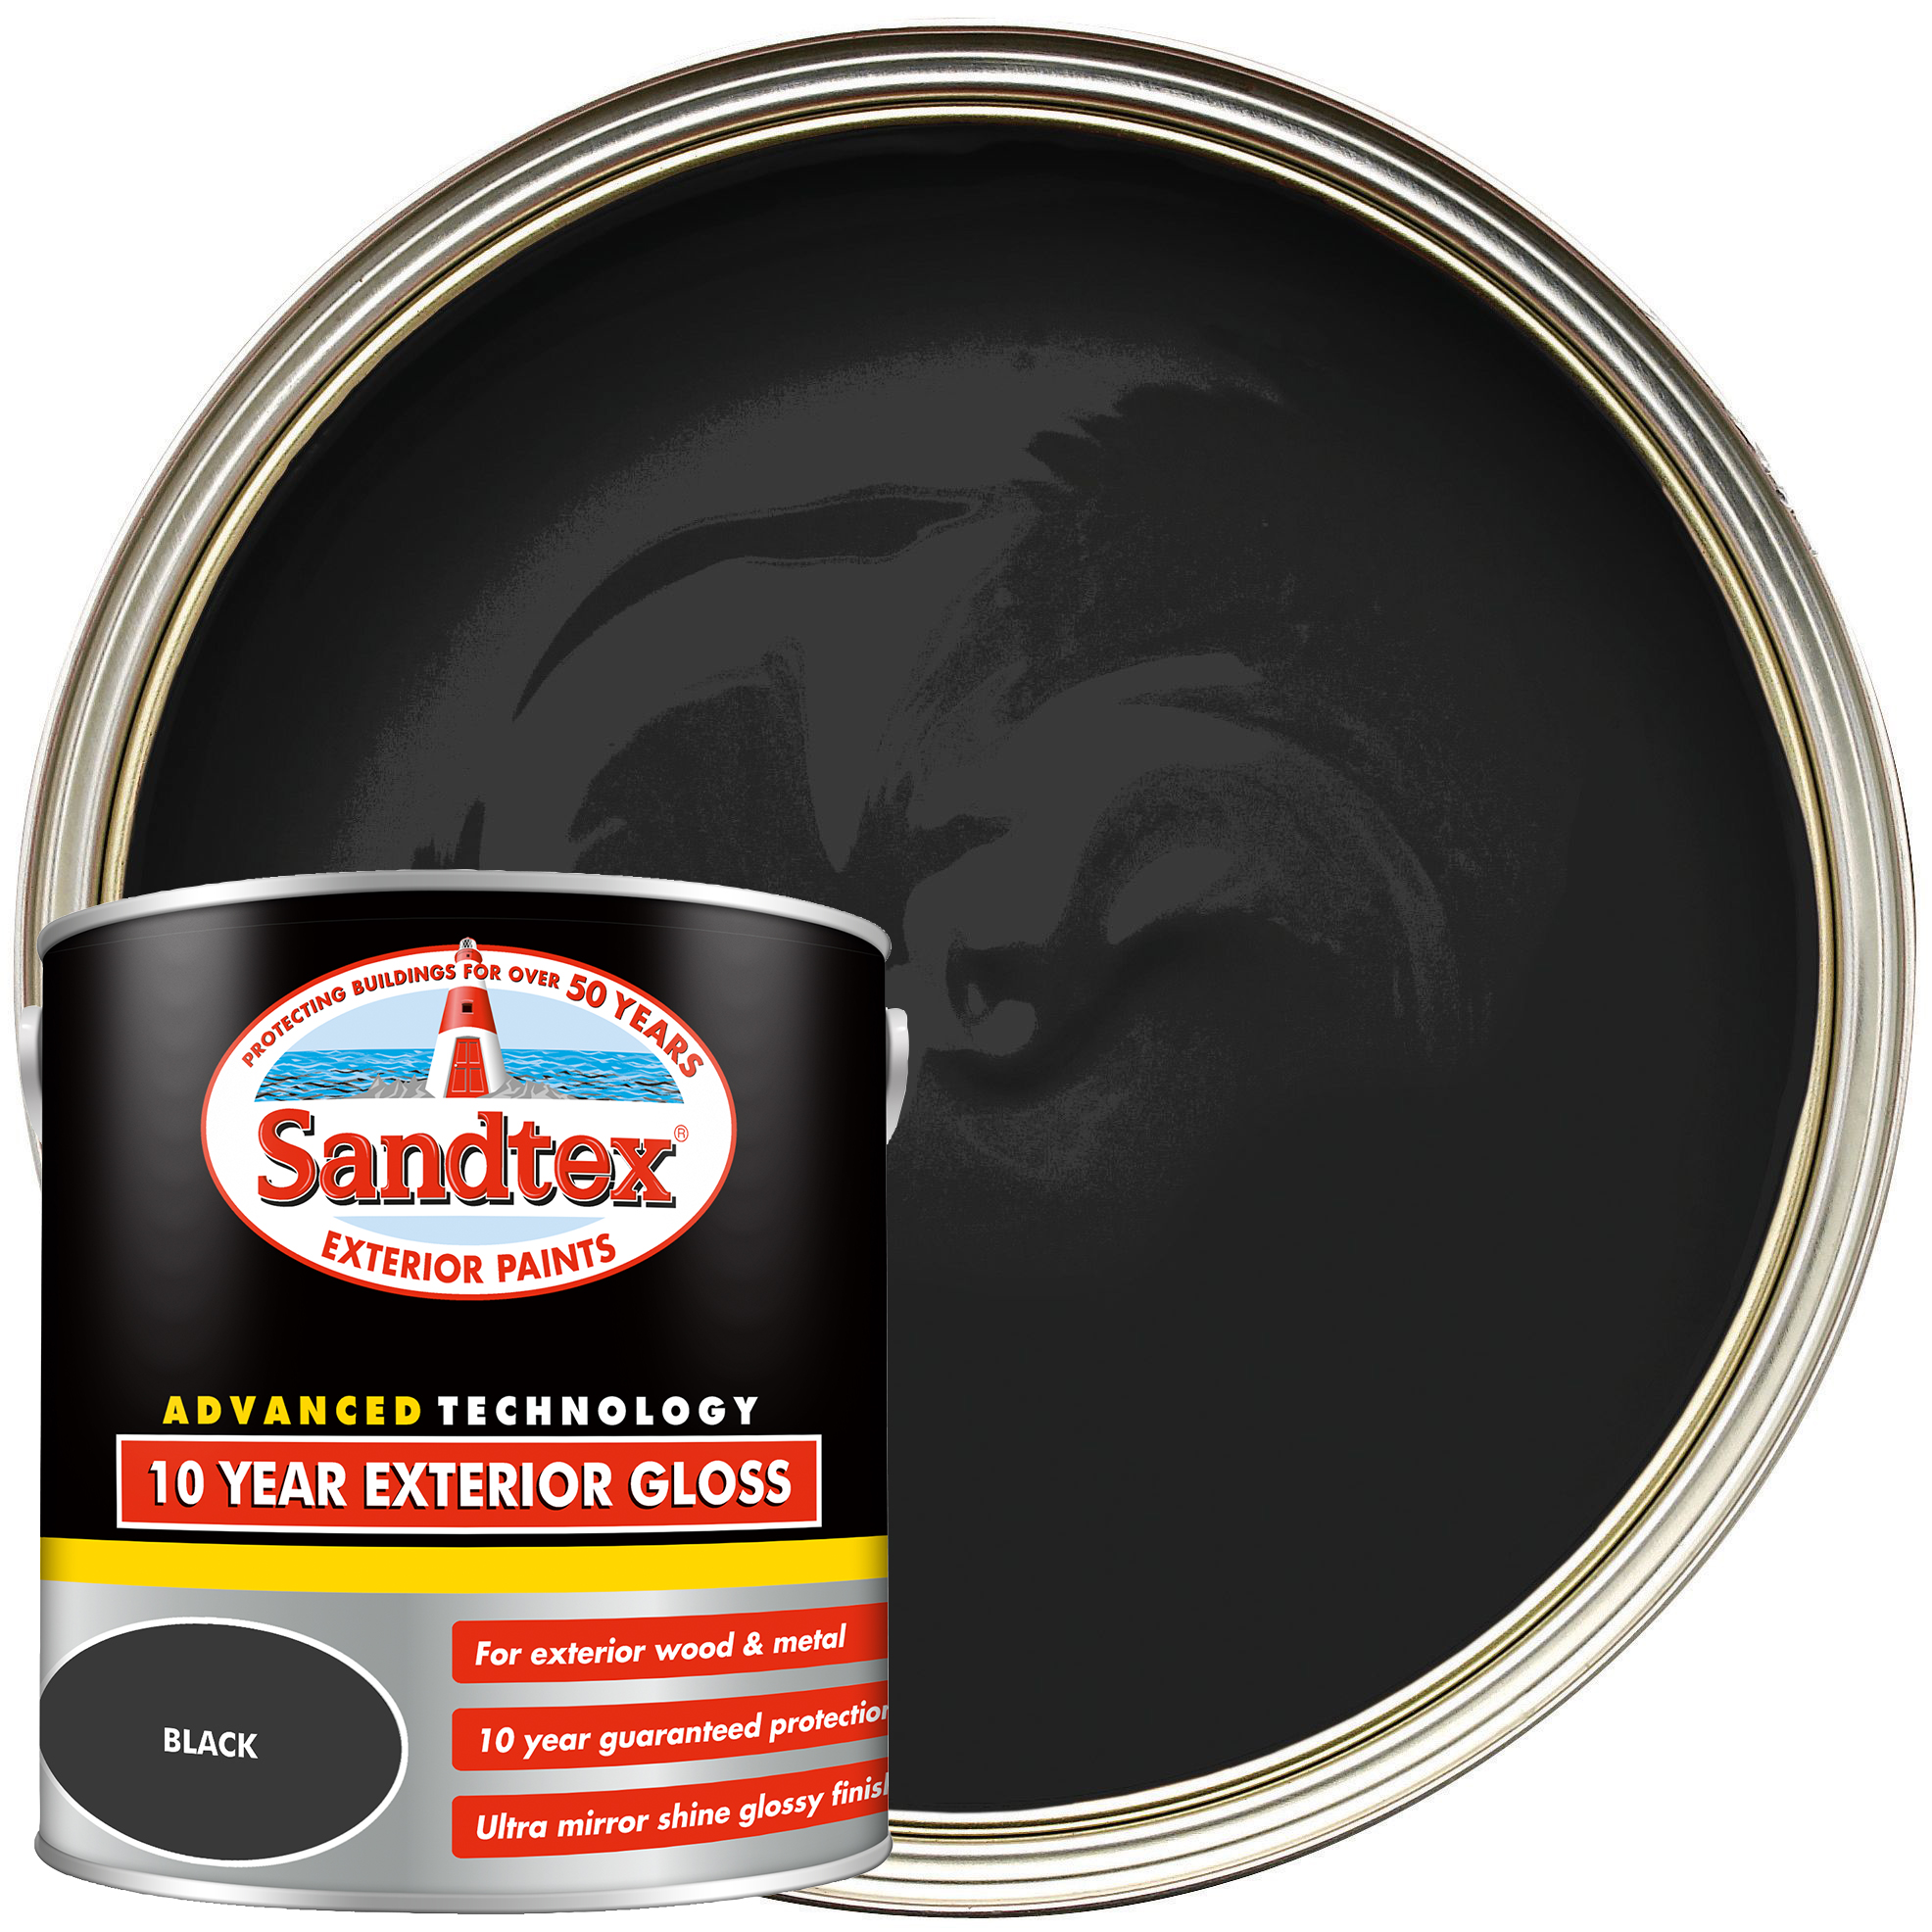 Image of Sandtex 10 Year Exterior Gloss Paint - Black - 2.5L